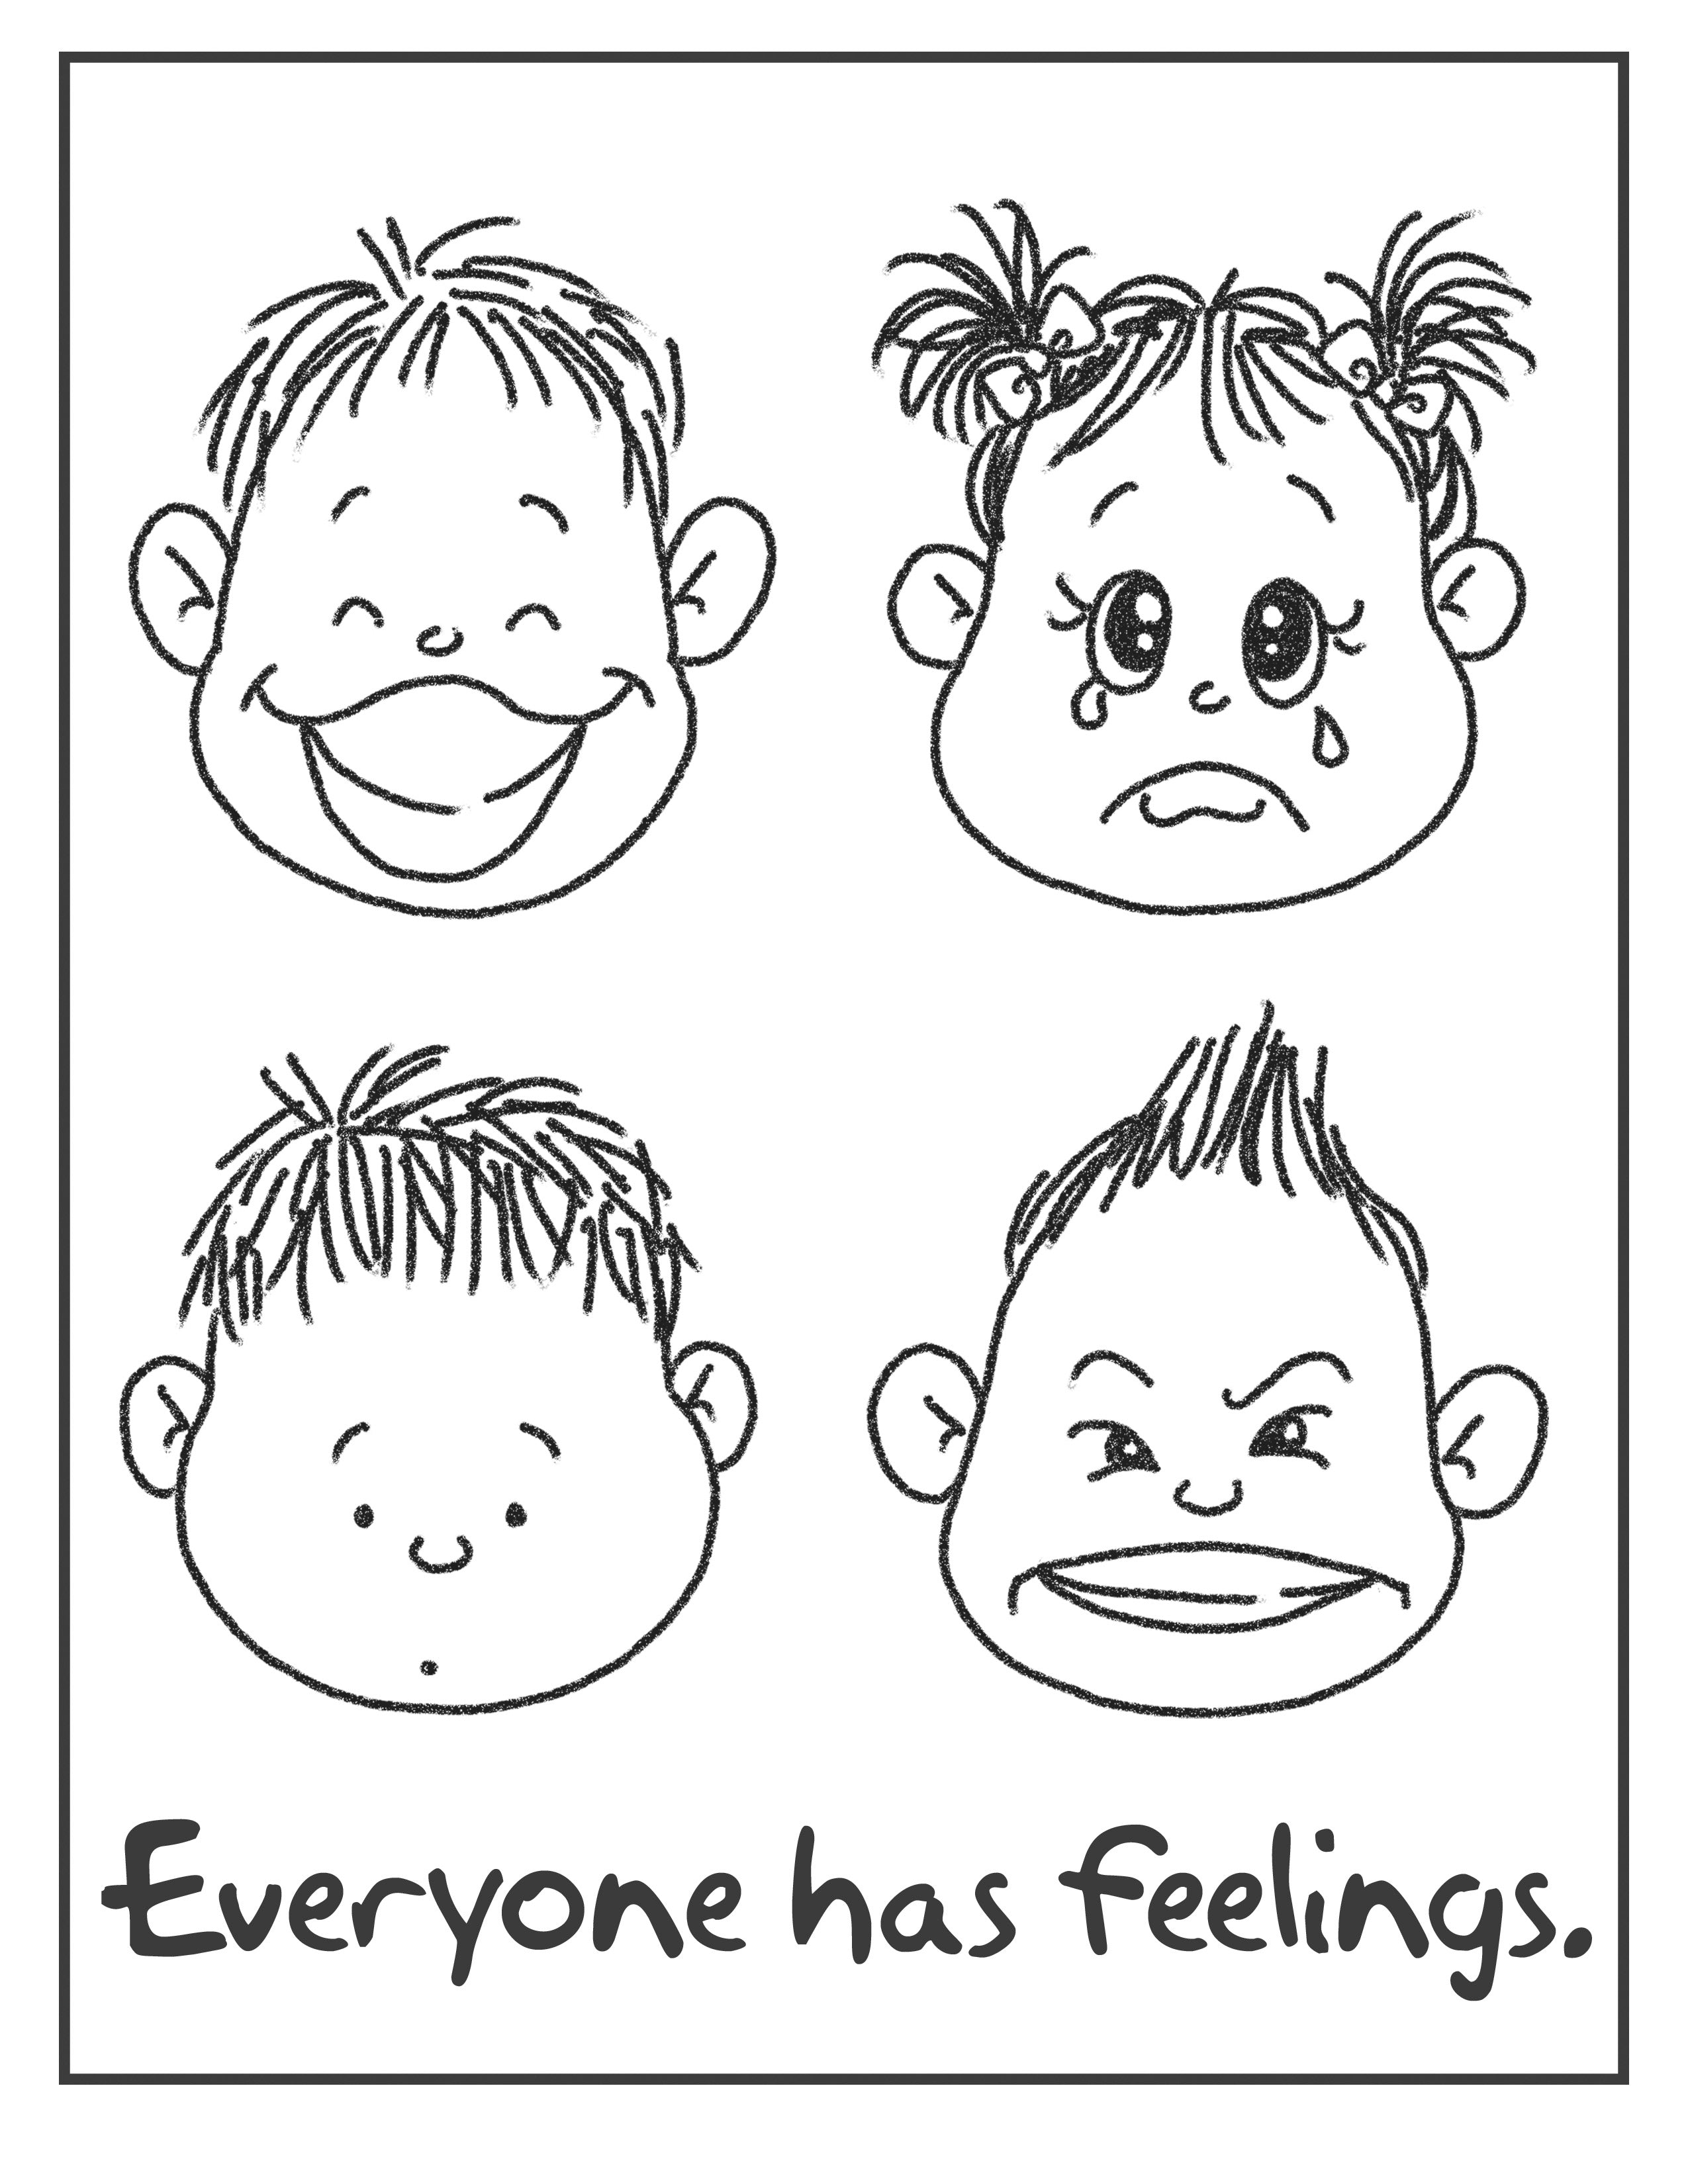 Feelings Thoughts Behavior Coloring Pages Coloring Pages